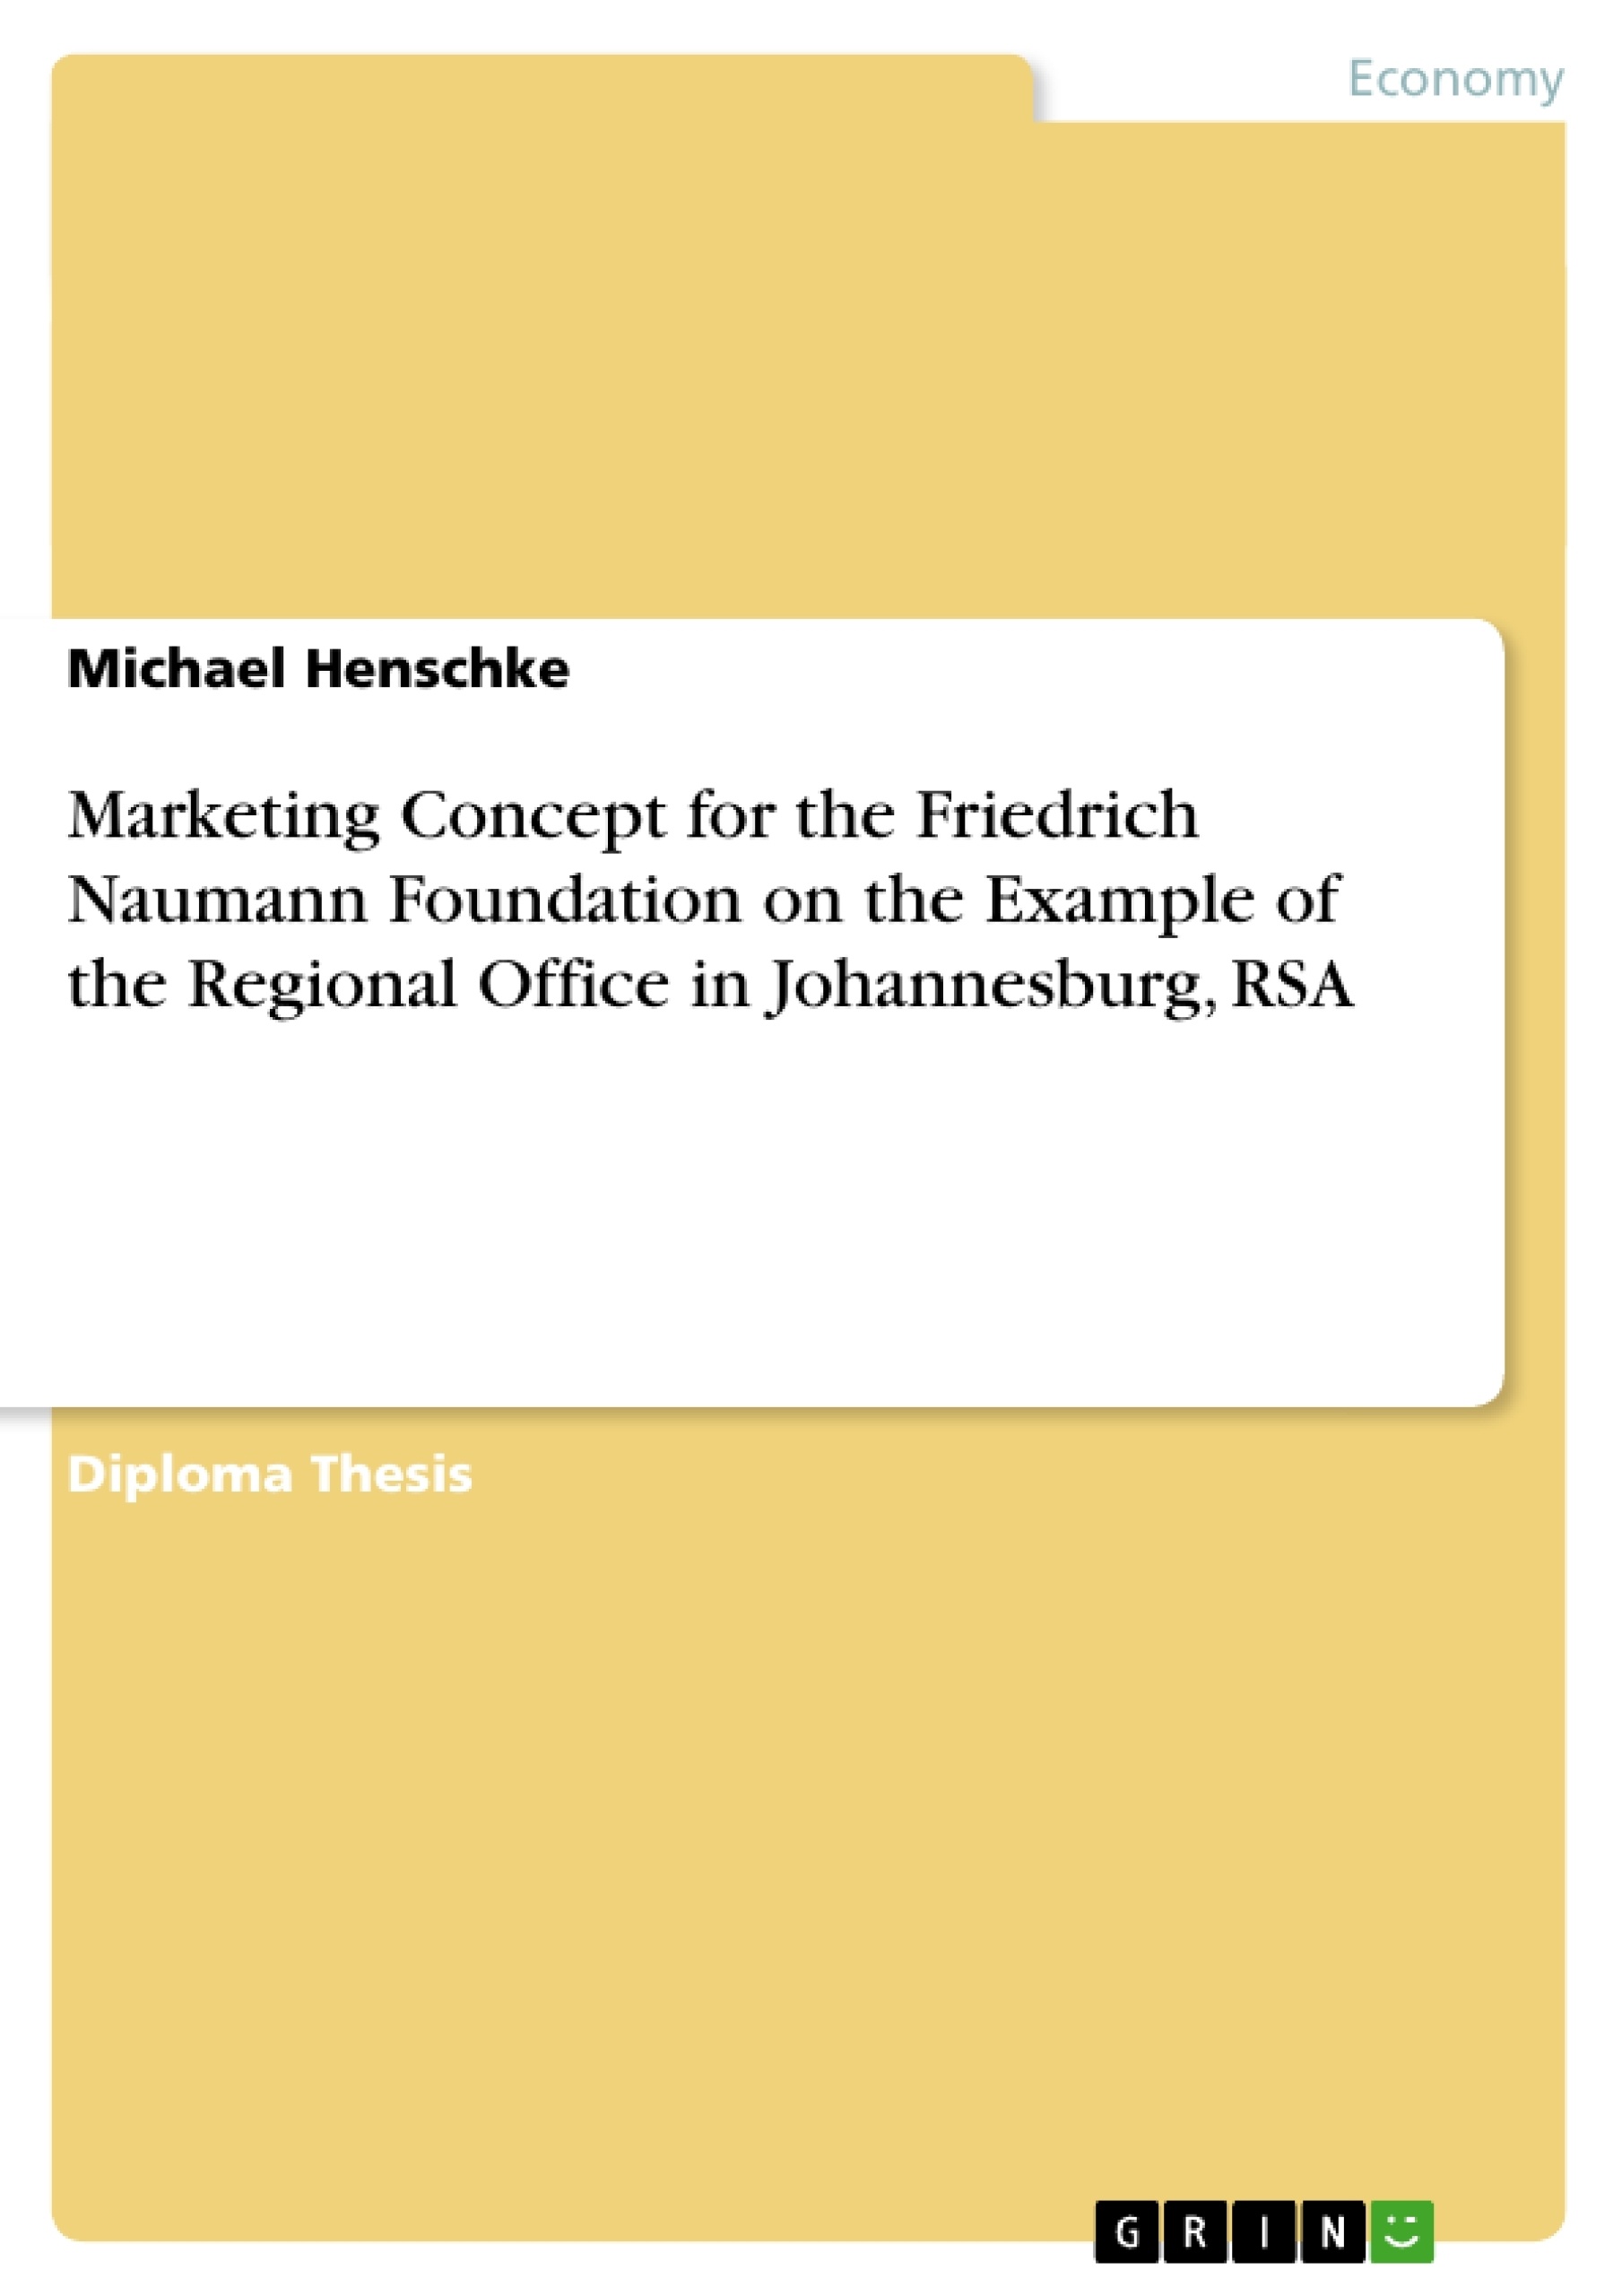 Titre: Marketing Concept for the Friedrich Naumann Foundation on the Example of the Regional Office in Johannesburg, RSA